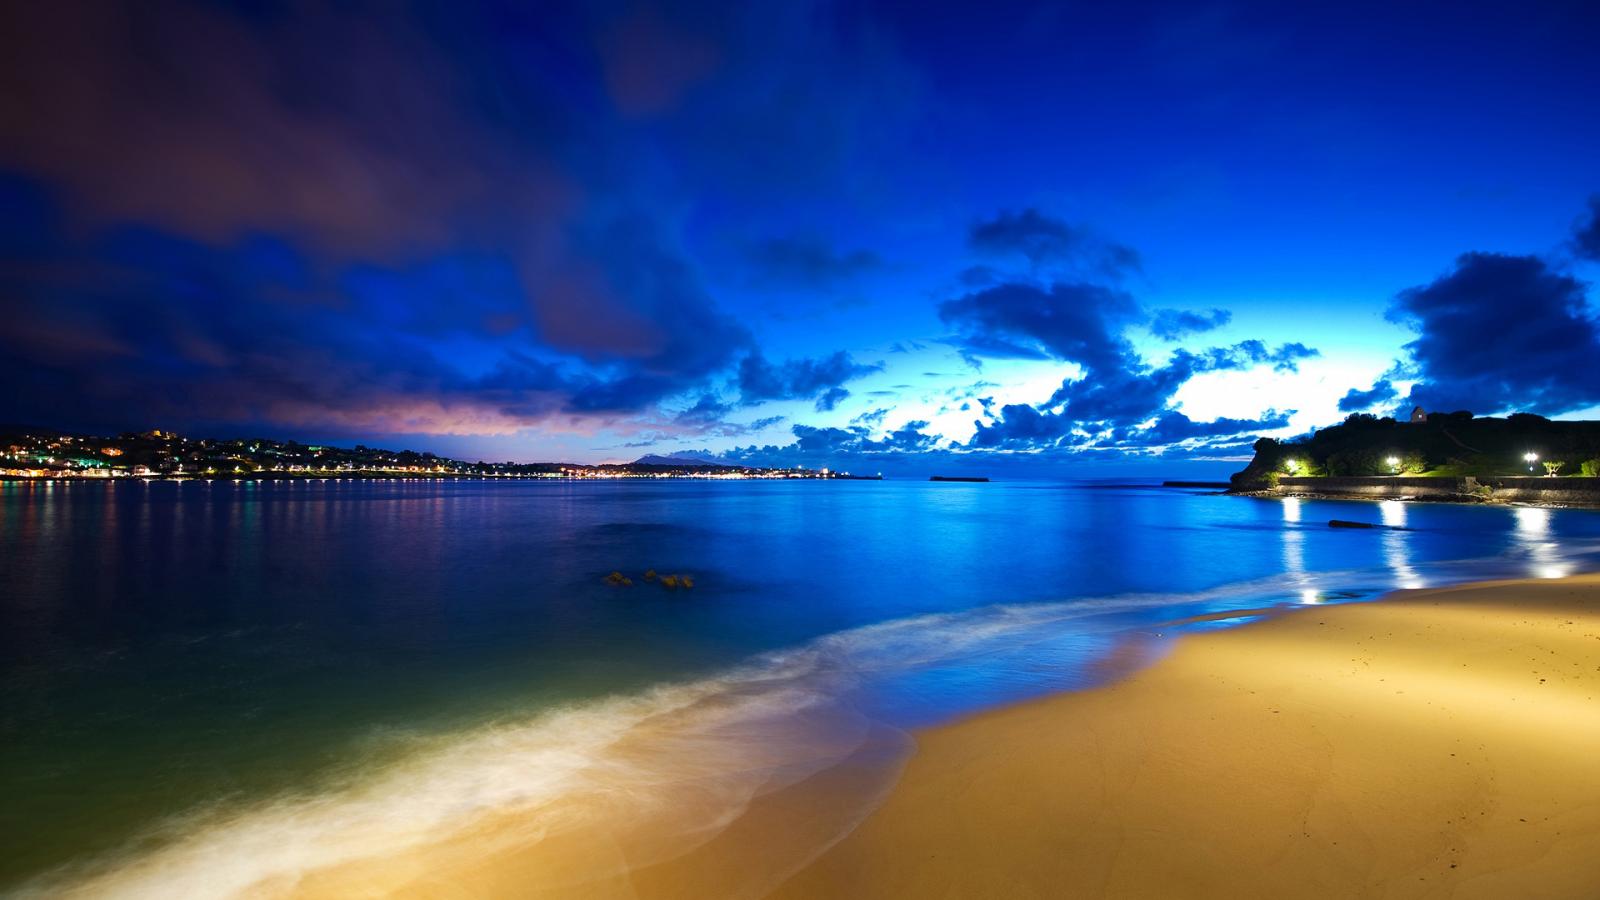  Beach Side HD Wallpapers 1600x900 Beach Wallpapers 1600x900 Download